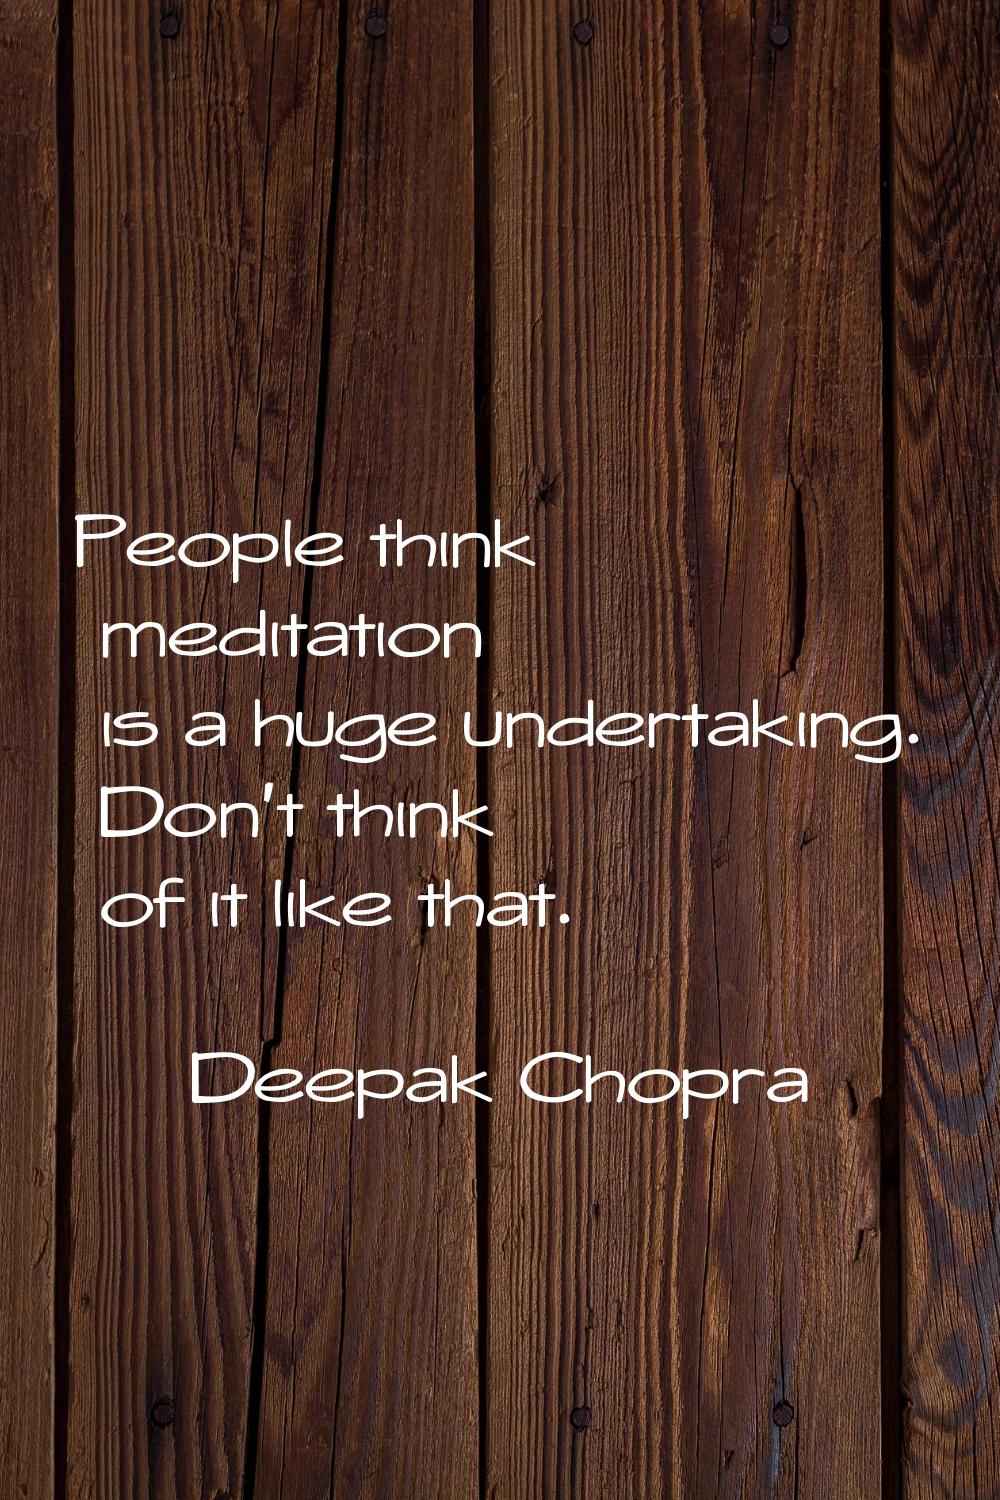 People think meditation is a huge undertaking. Don't think of it like that.